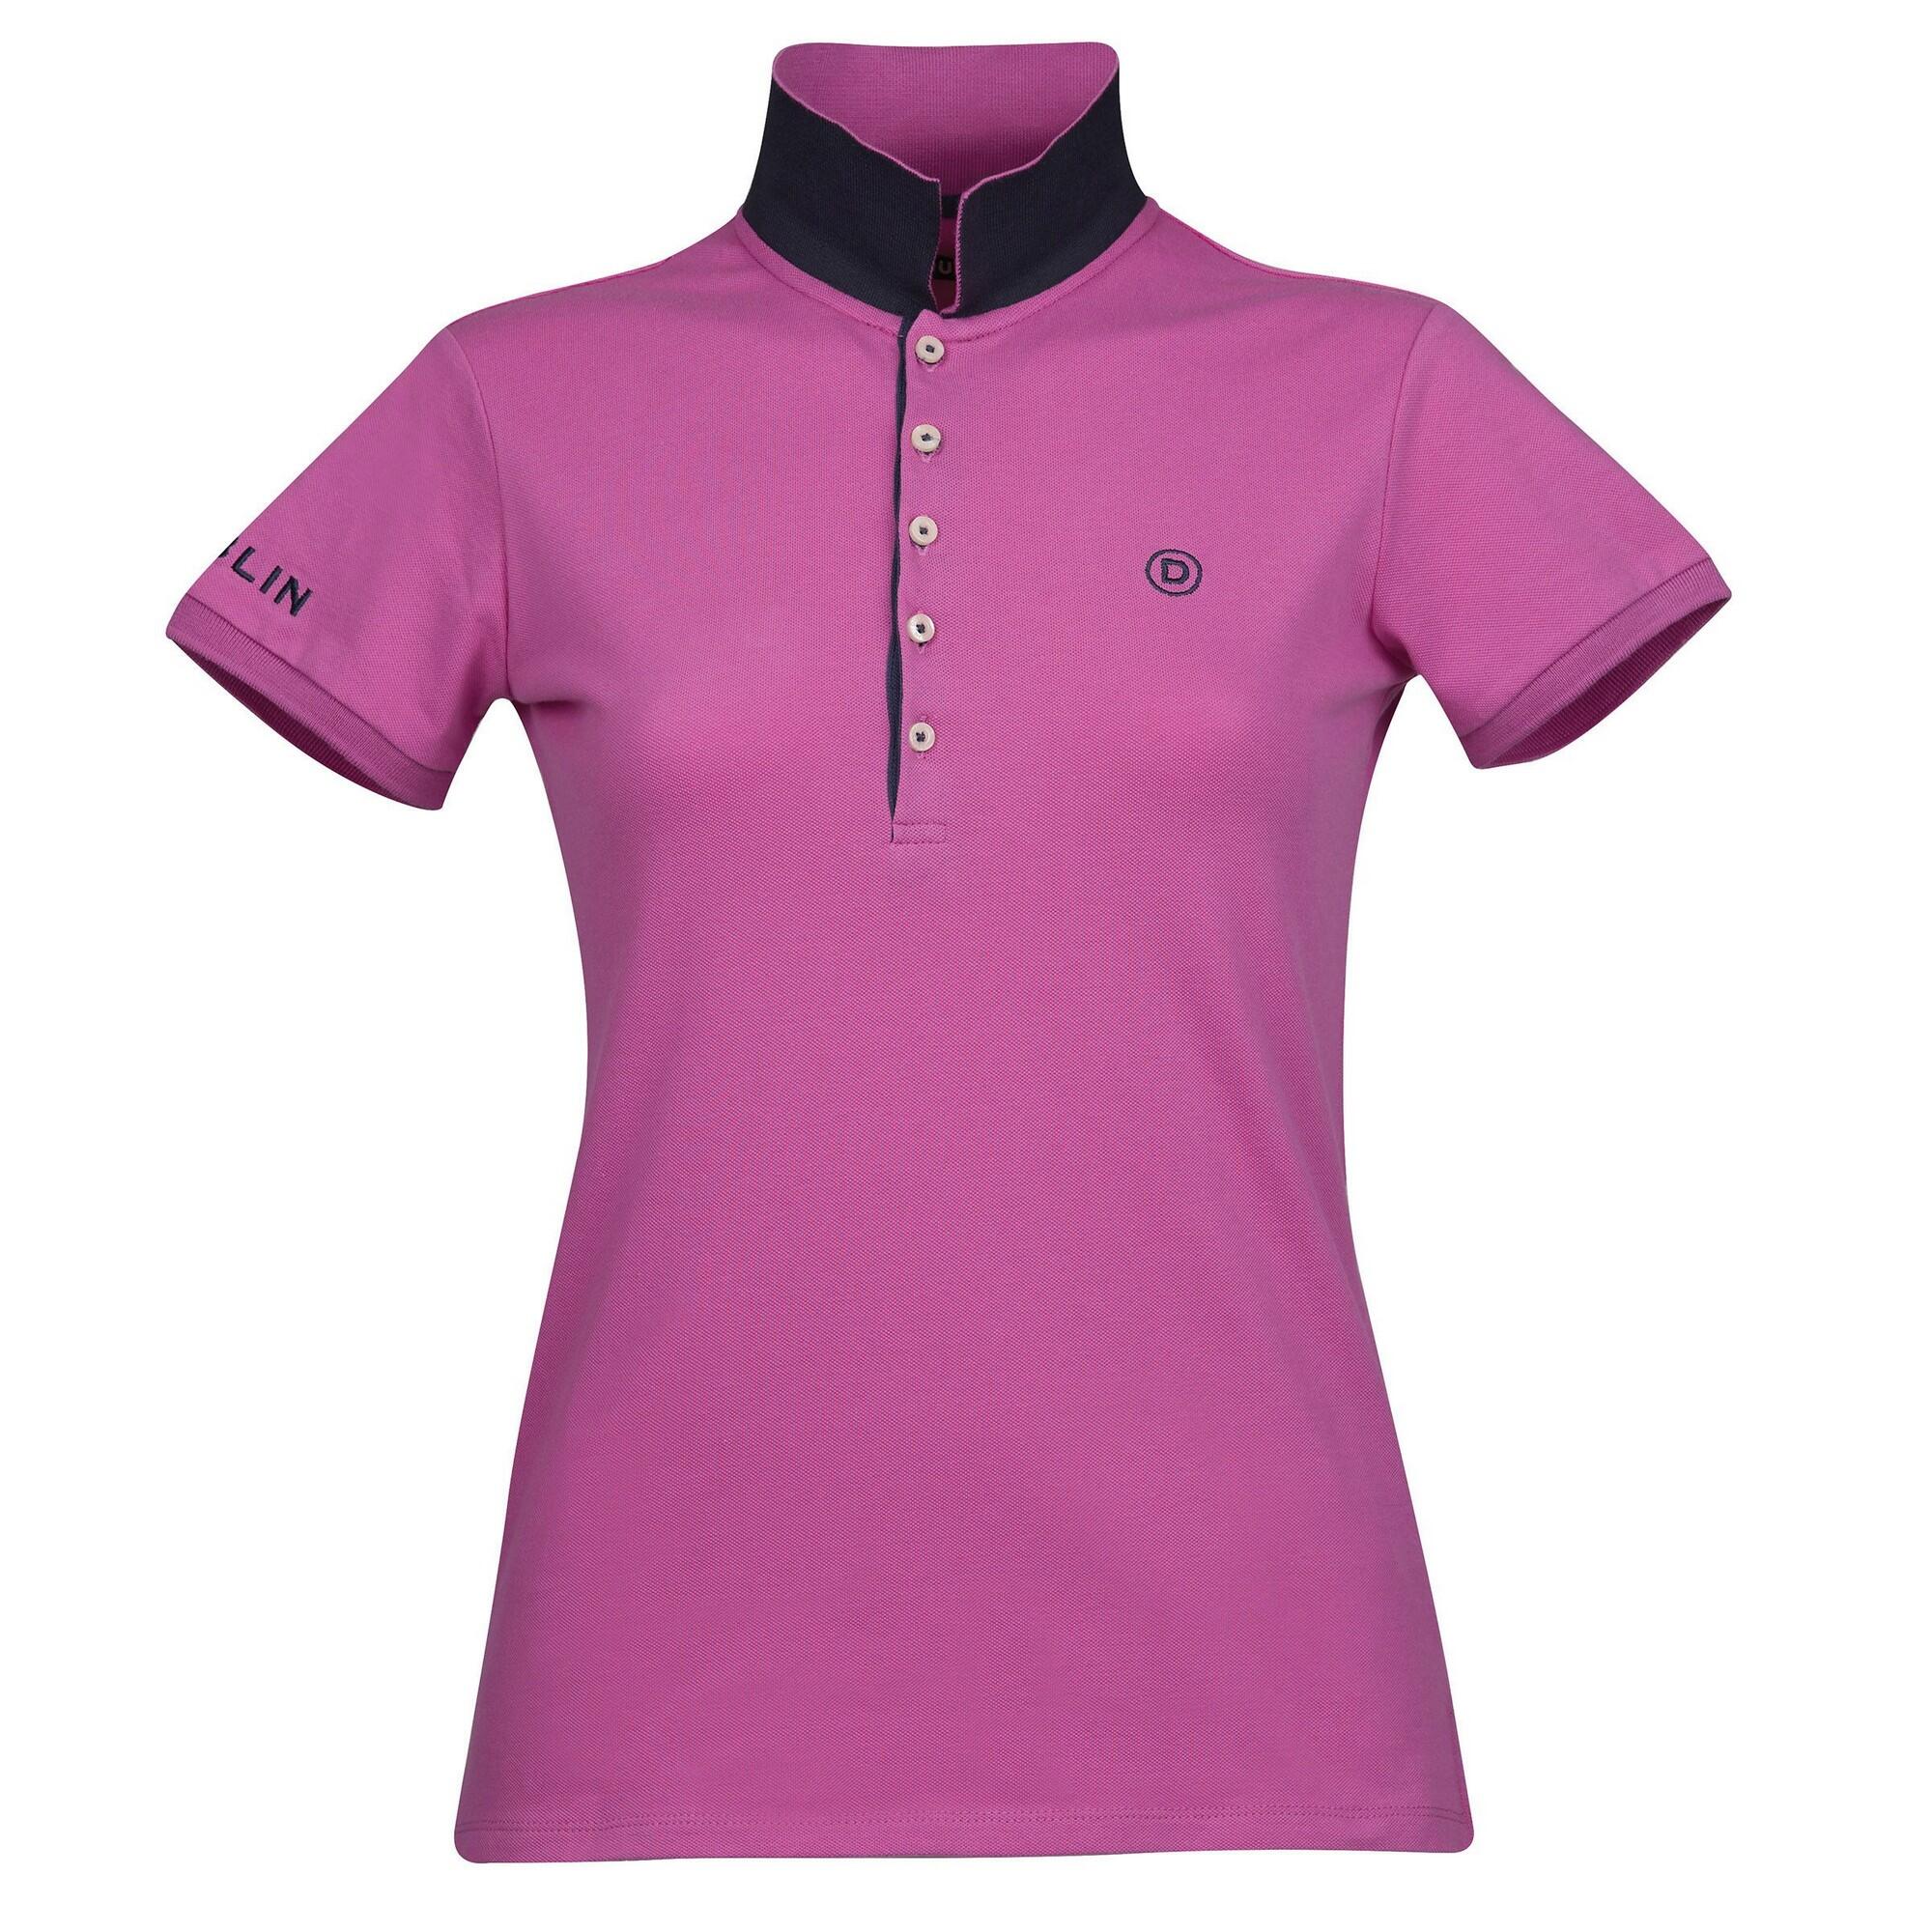 DUBLIN Womens/Ladies Lily Capped Sleeved Polo Shirt (Red Violet)